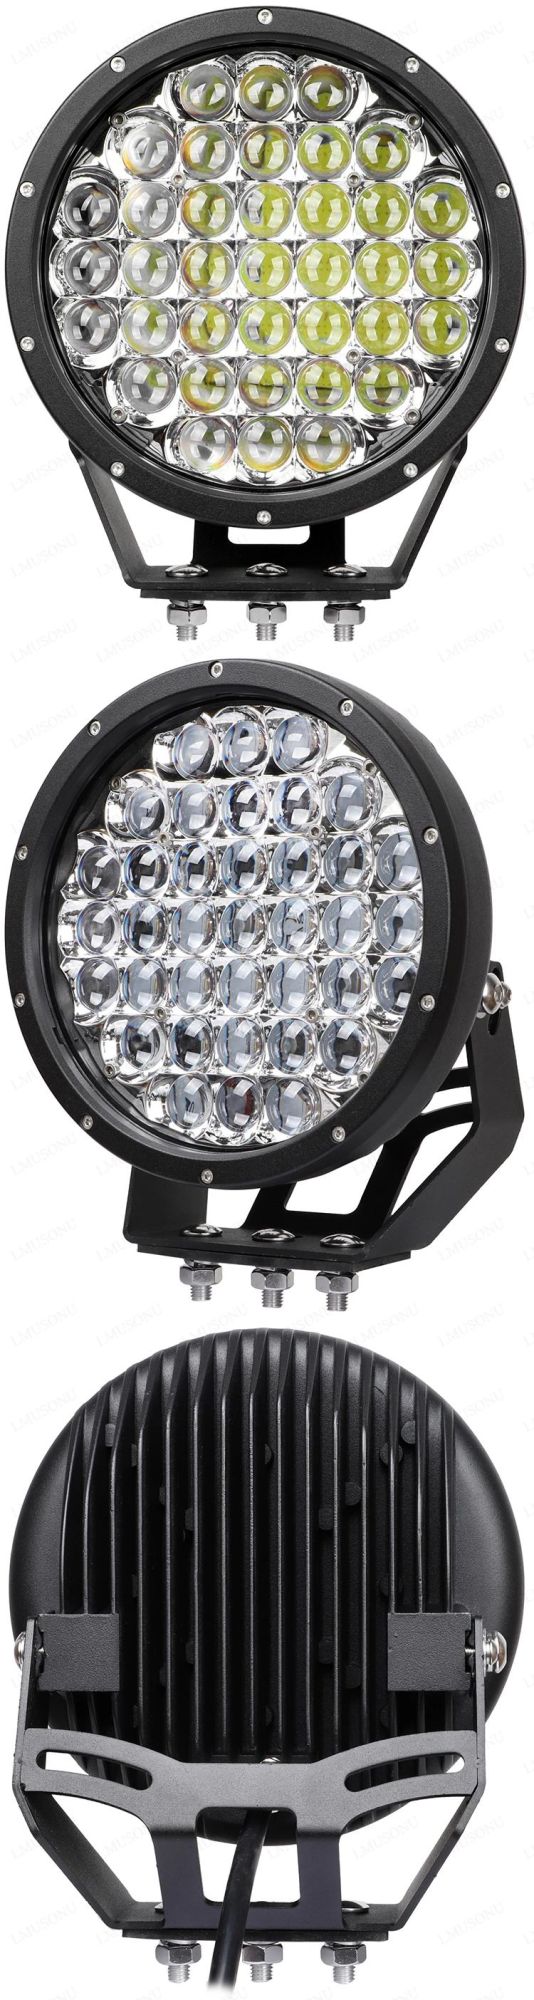 9.0 Inch 370W 4X4 Offroad Auxiliary 5D LED Driving Light Work Fog Lamp for Auto Car Truck Boat